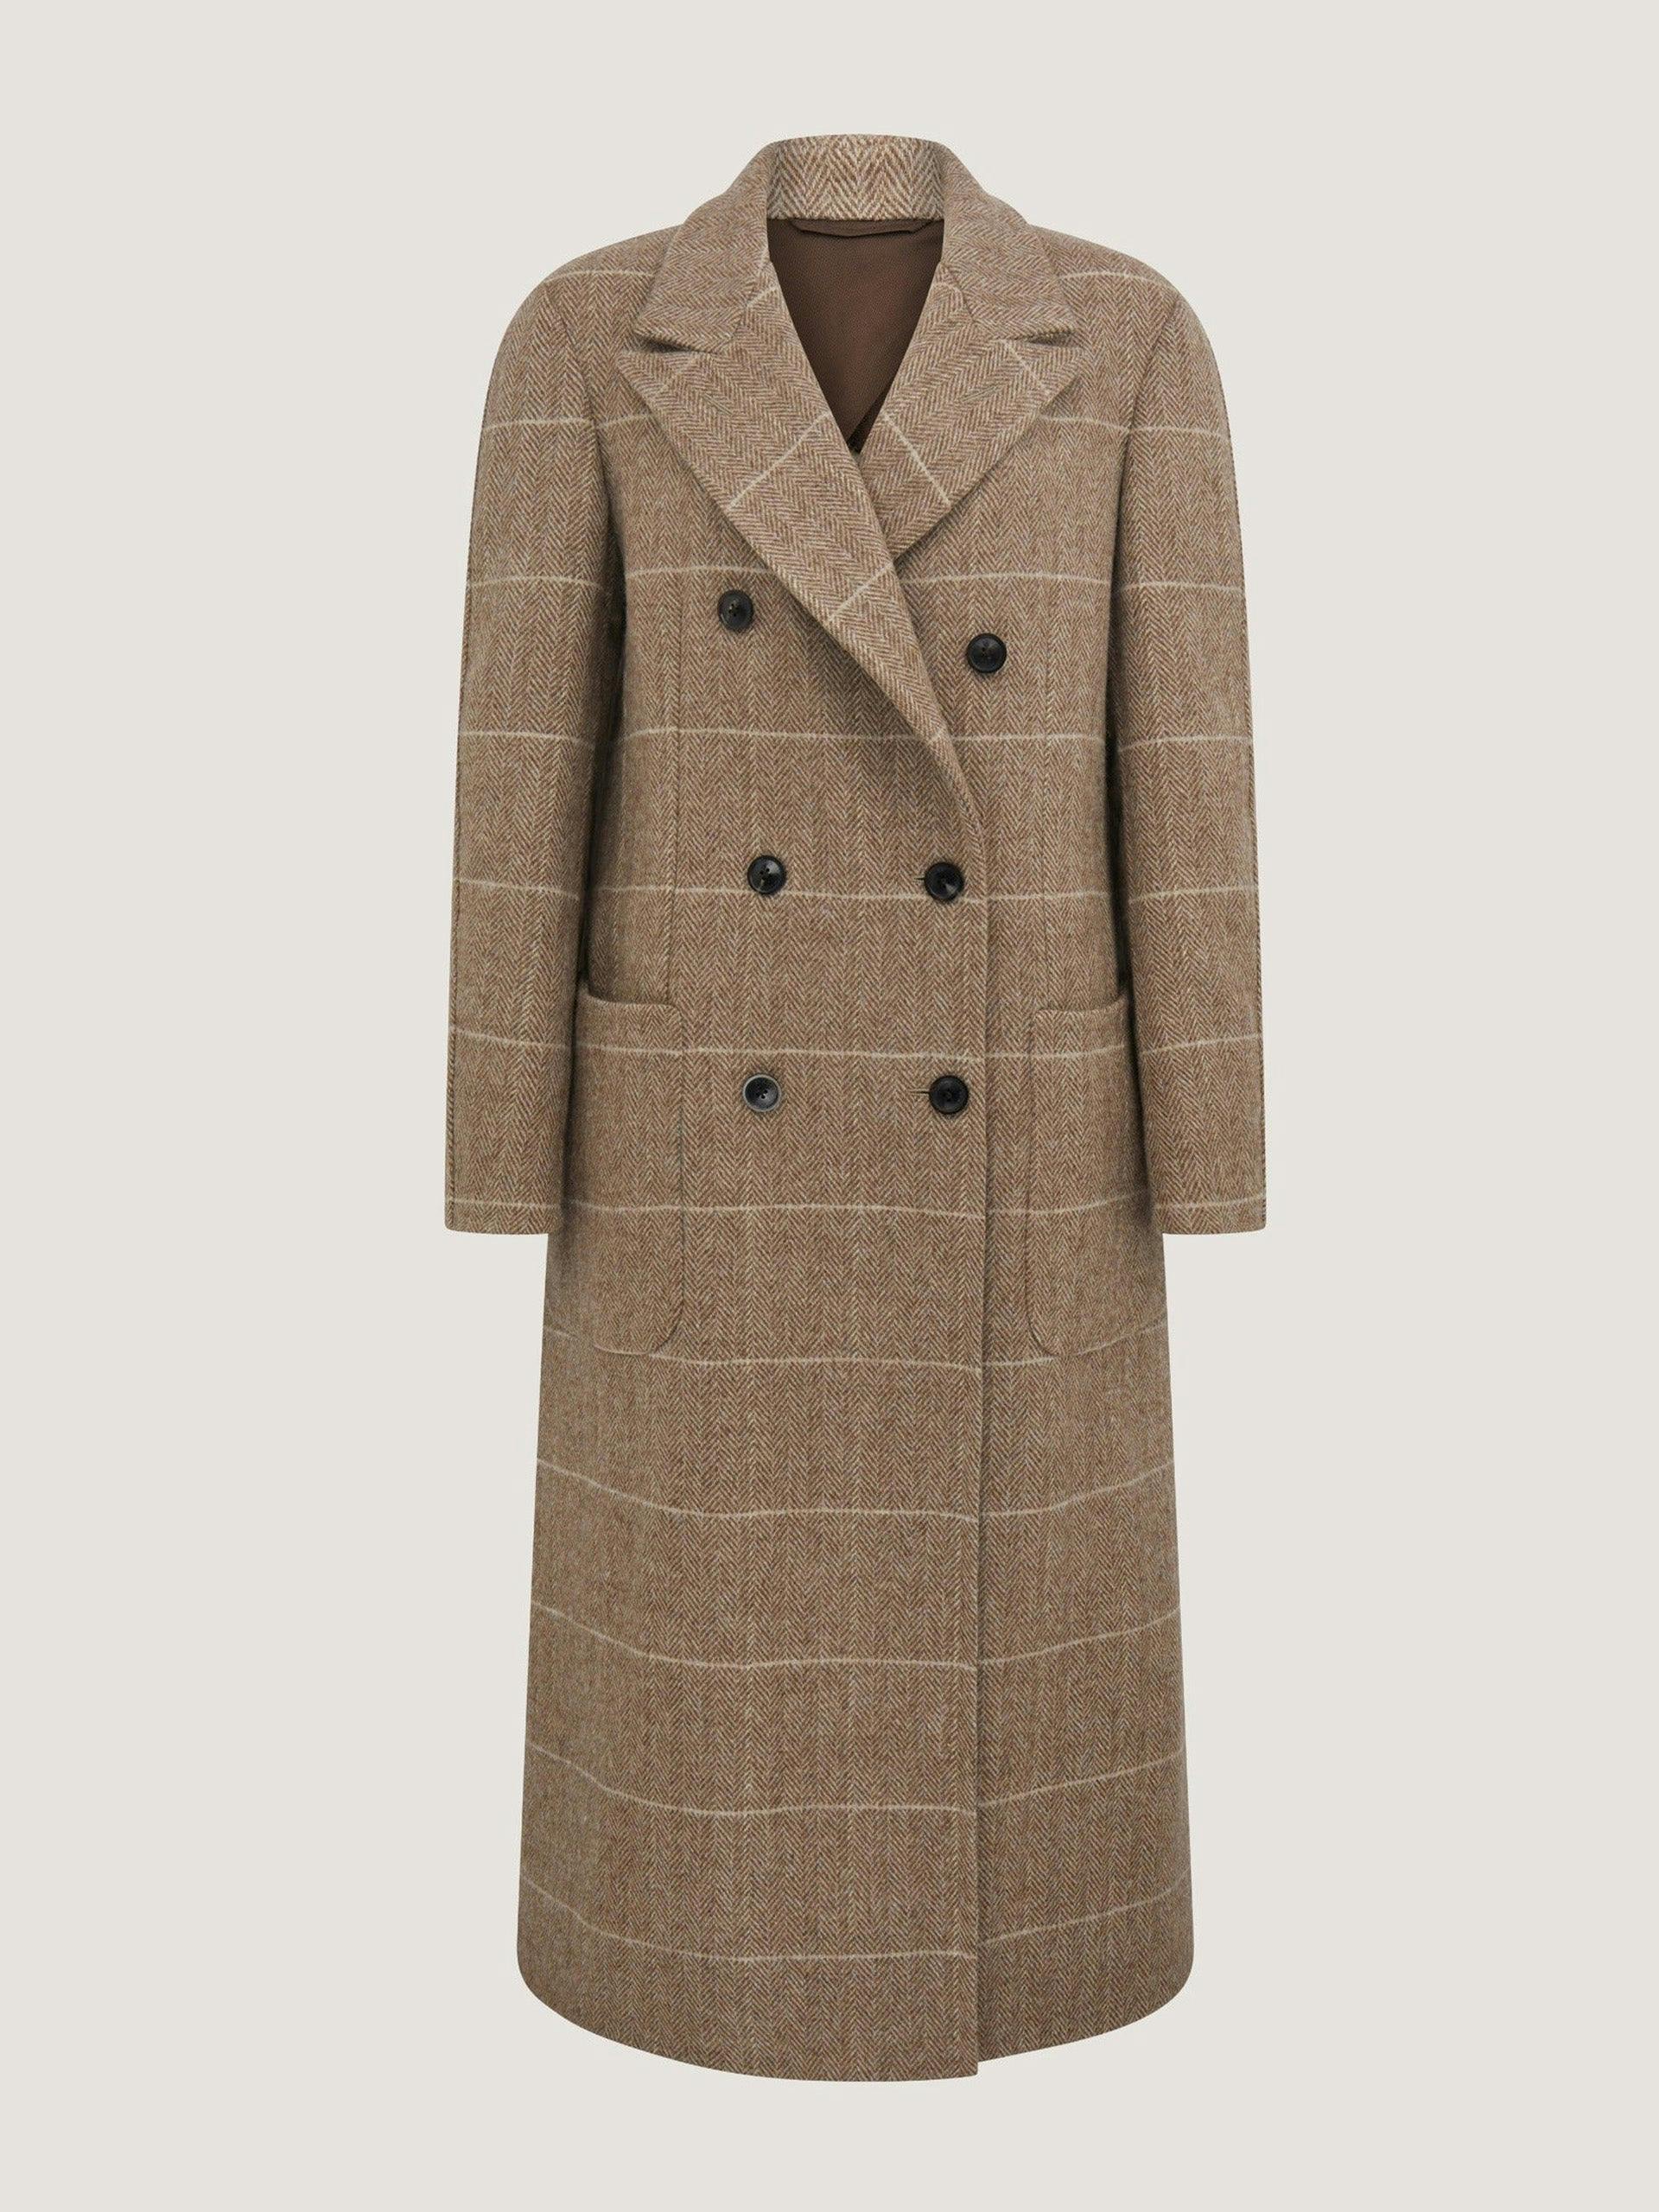 Town and country coat in elk